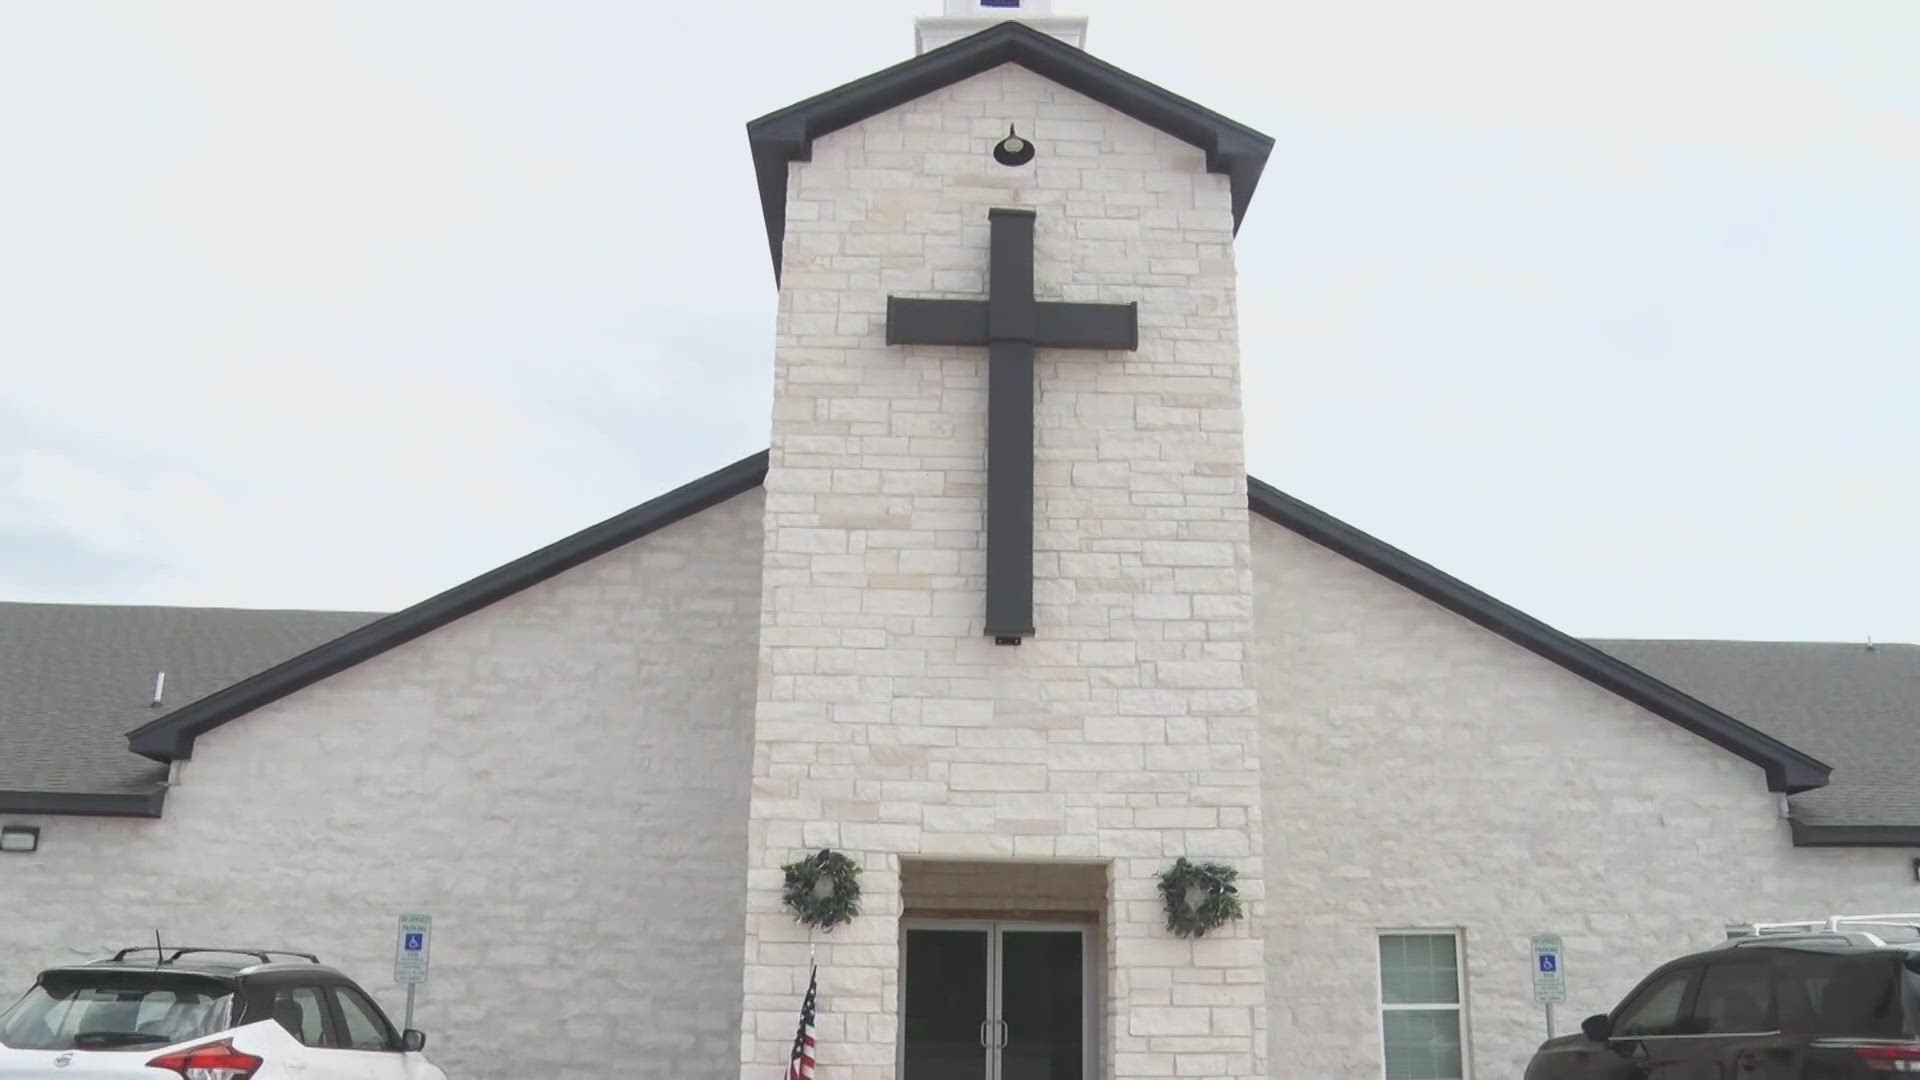 Nearly one year ago, a tornado destroyed the First Cedar Valley Baptist Church. On Saturday, the new walls were celebrated by the people who make it feel like home.